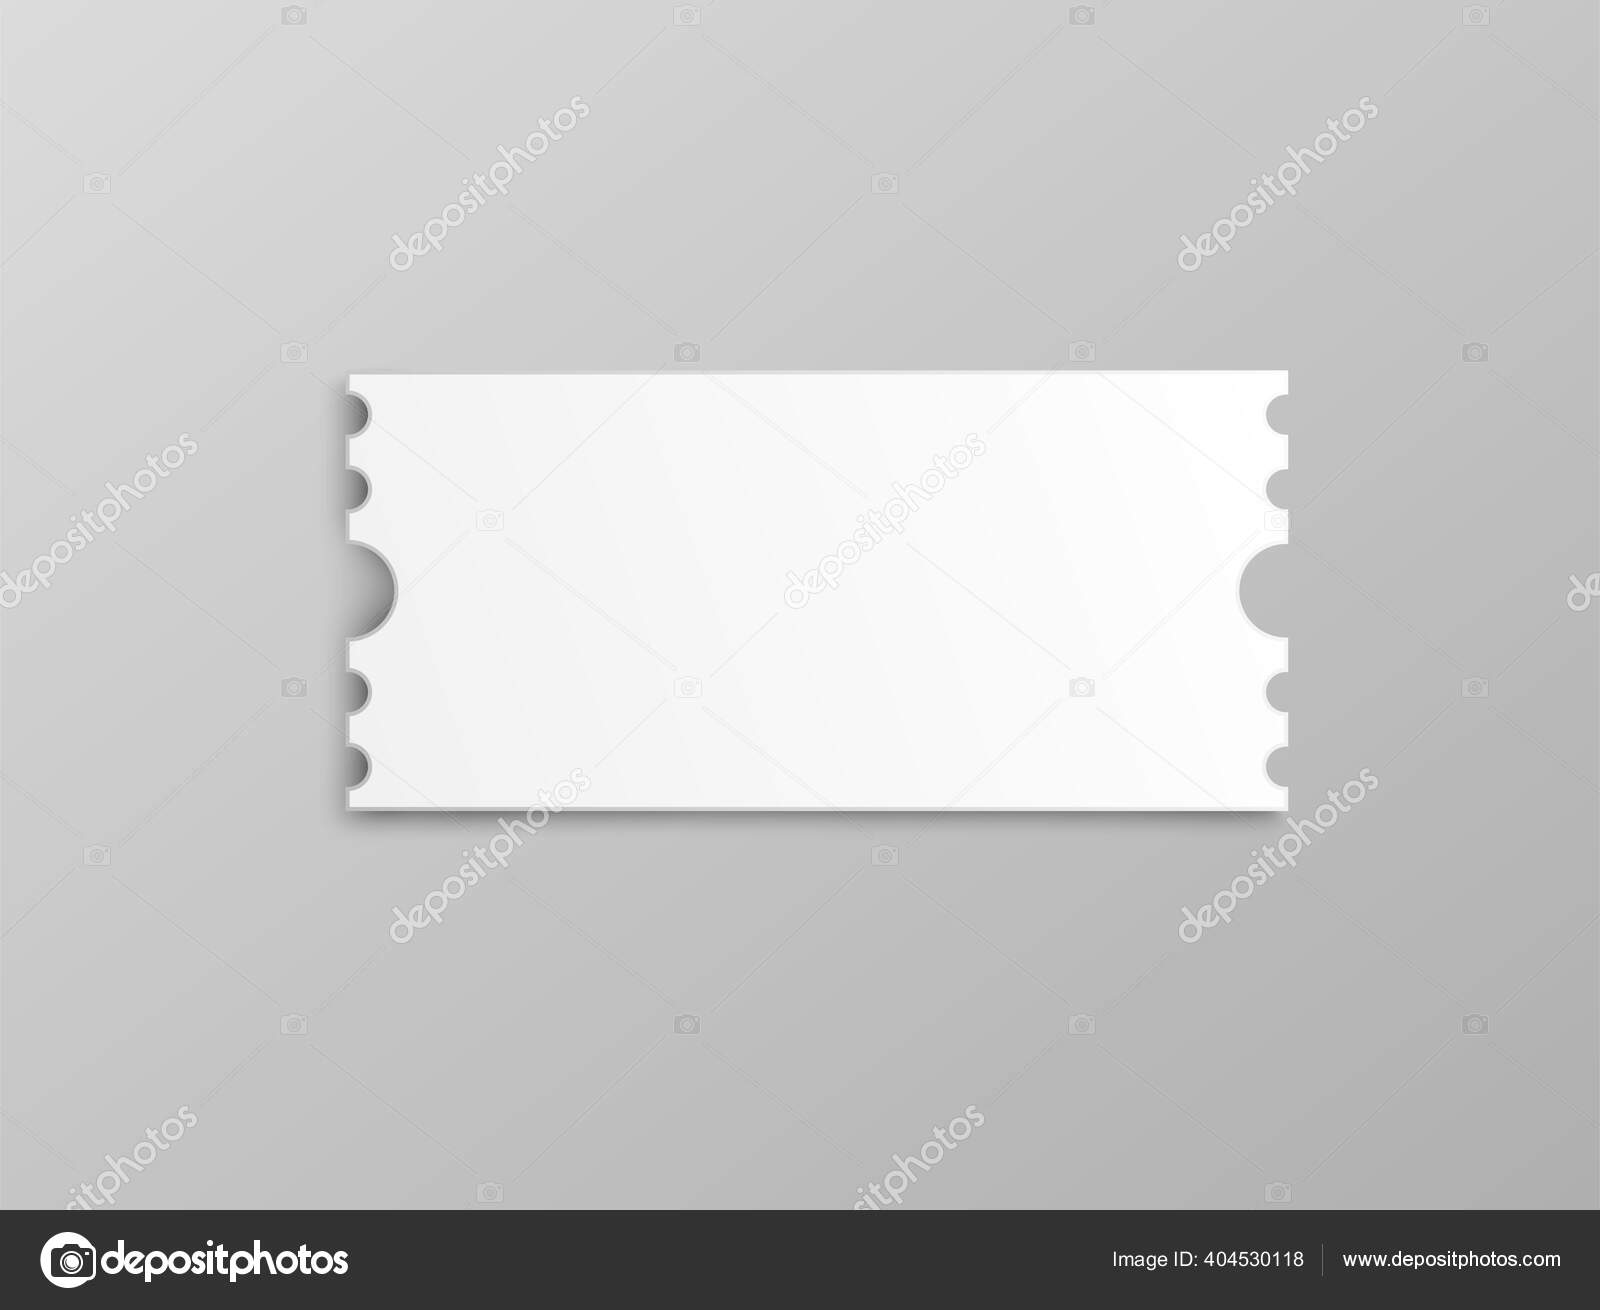 Blank Event Ticket Template from st4.depositphotos.com